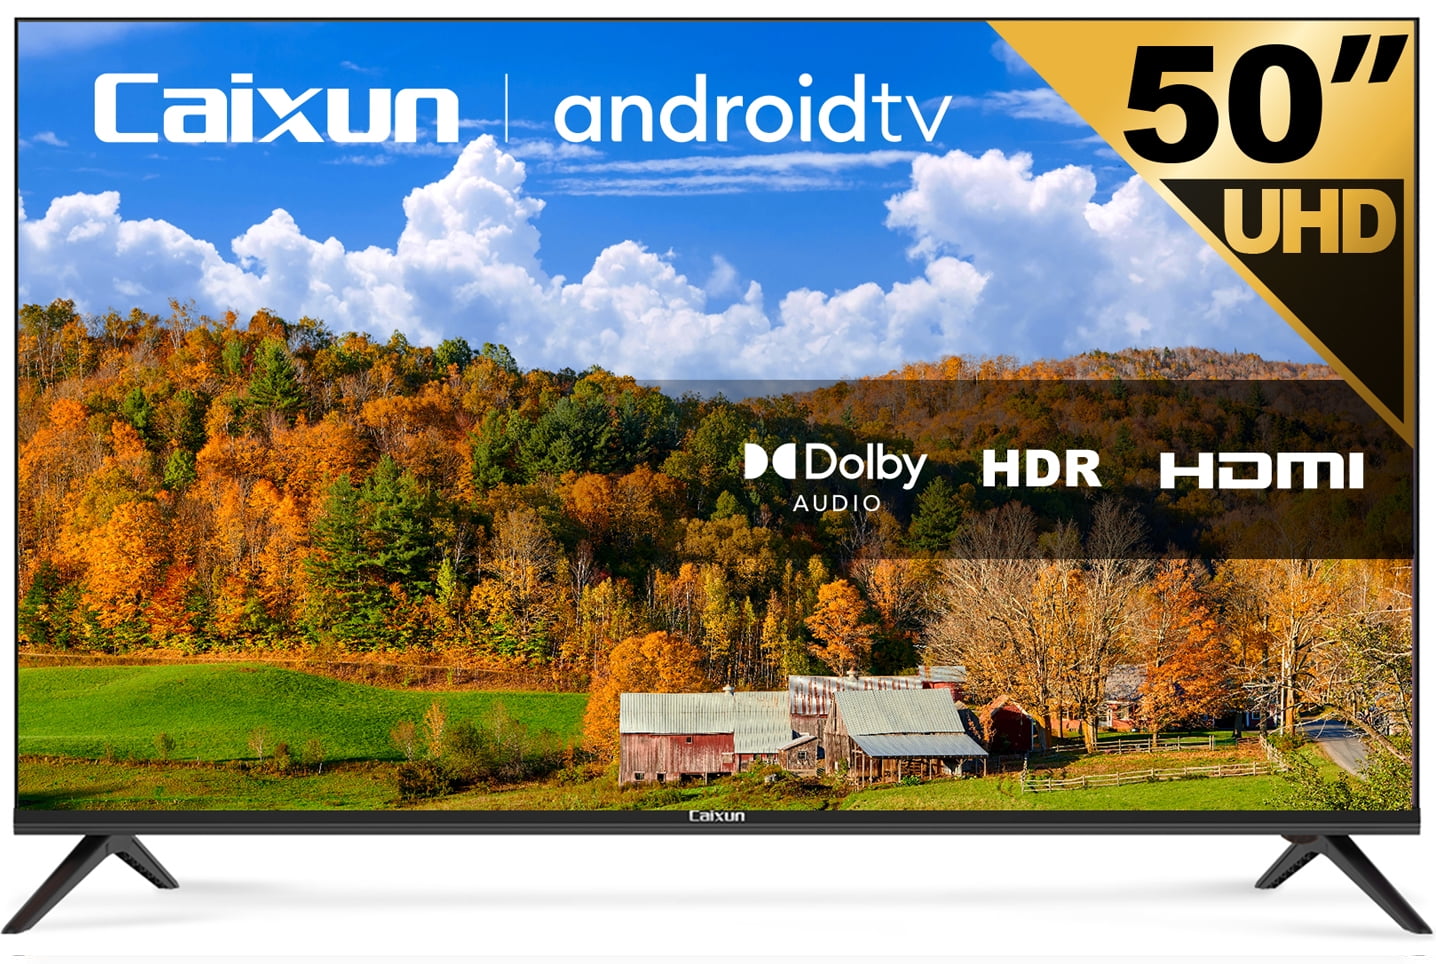 Caixun EC50S1A, 50 inch 4K UHD HDR DLED Android Smart TV